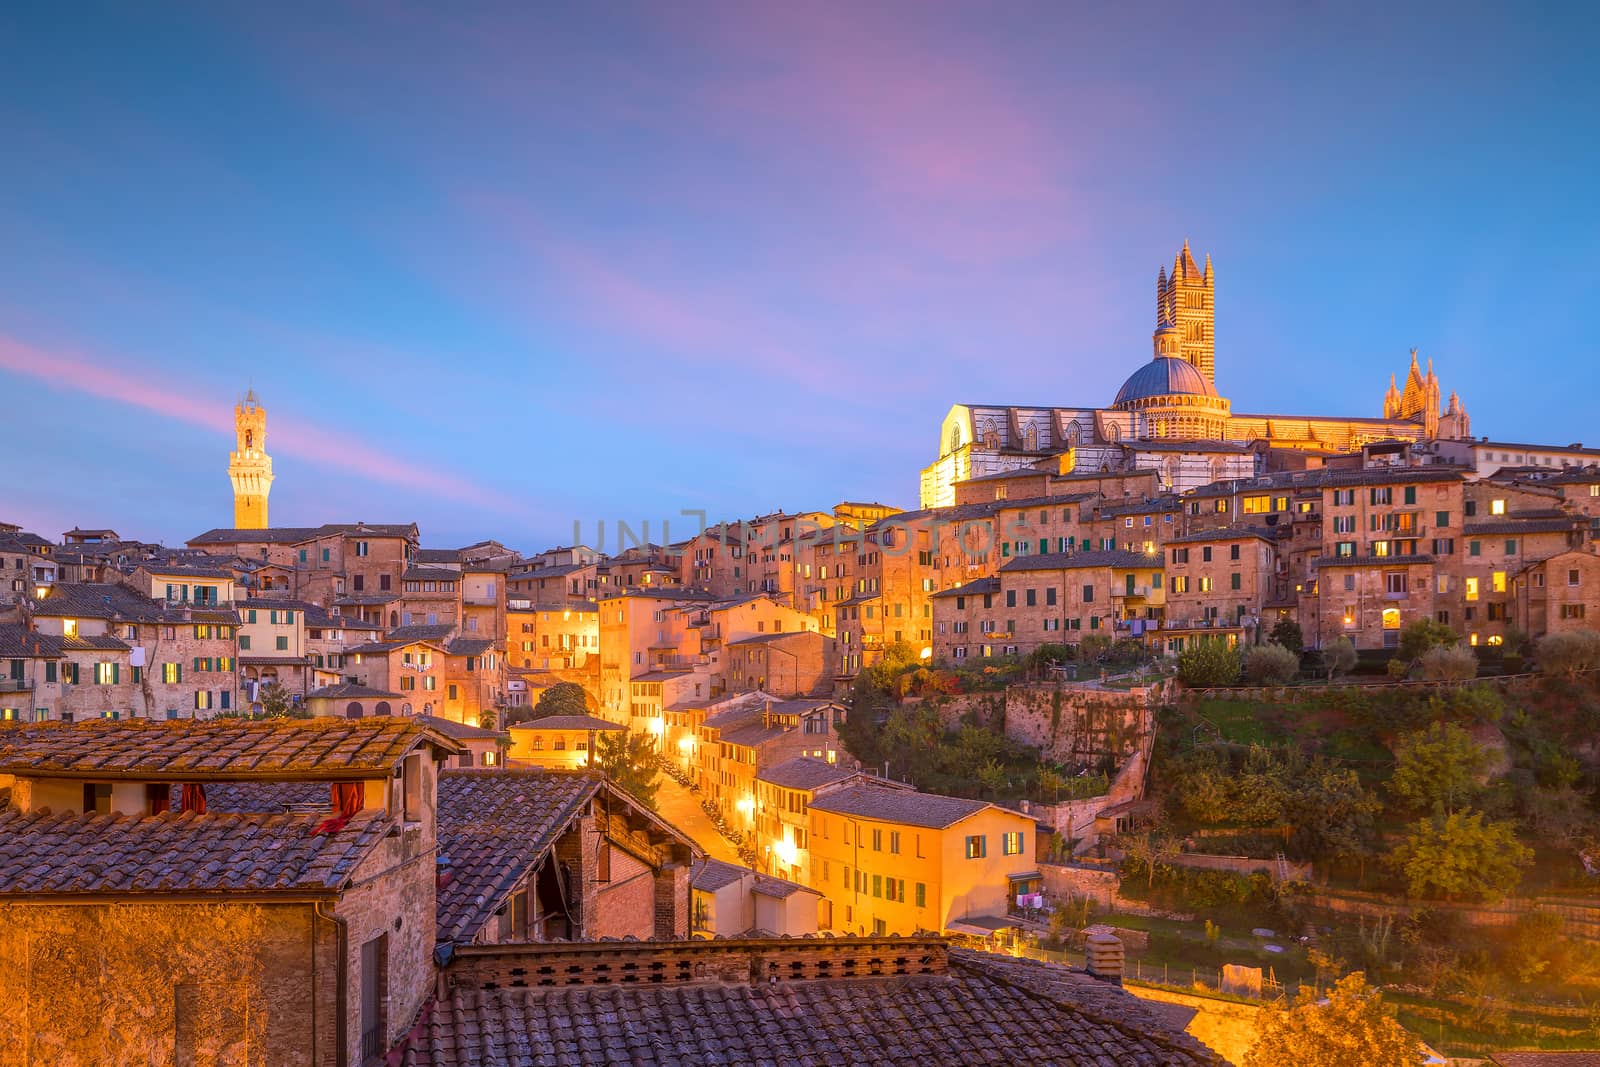 Downtown Siena skyline in Italy with beautiful sunset